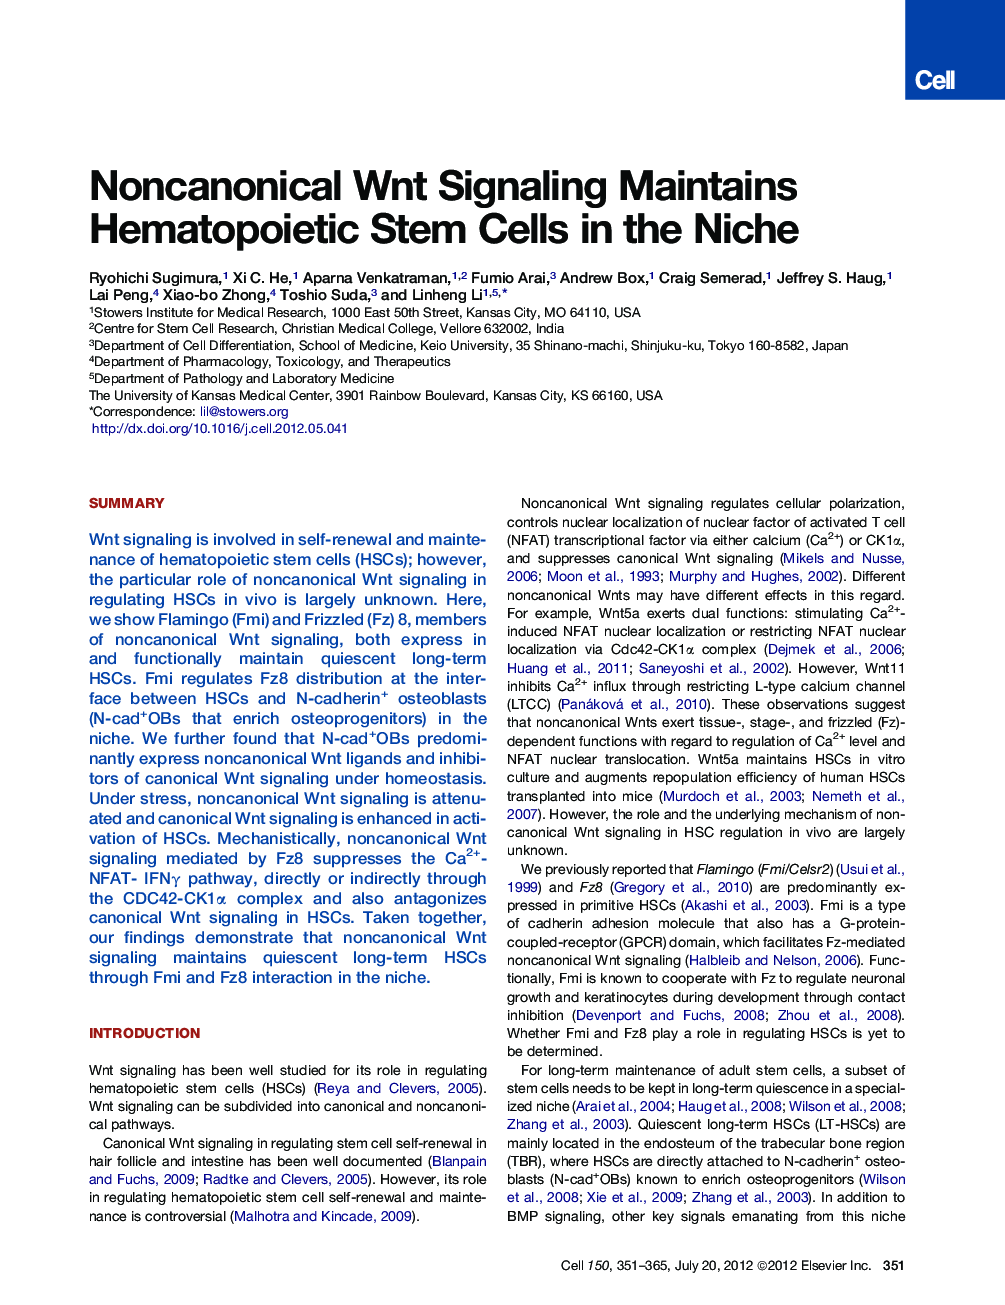 Noncanonical Wnt Signaling Maintains Hematopoietic Stem Cells in the Niche